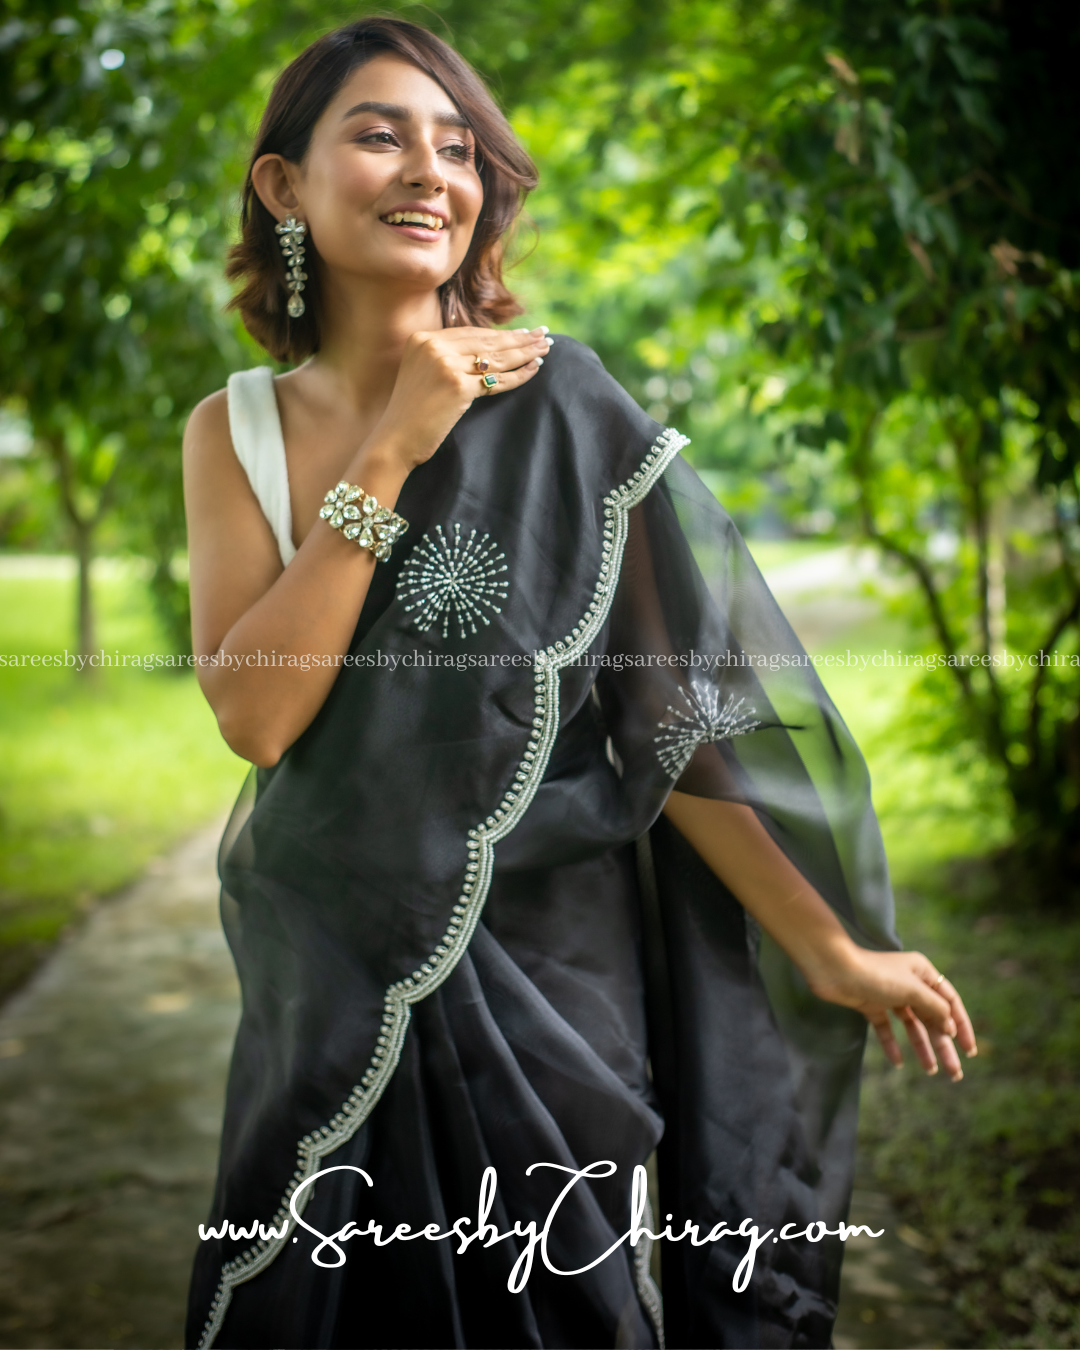 Black Organza Saree with Exquisite Hand-Cutwork Border and Pearl Embellishments - Anika